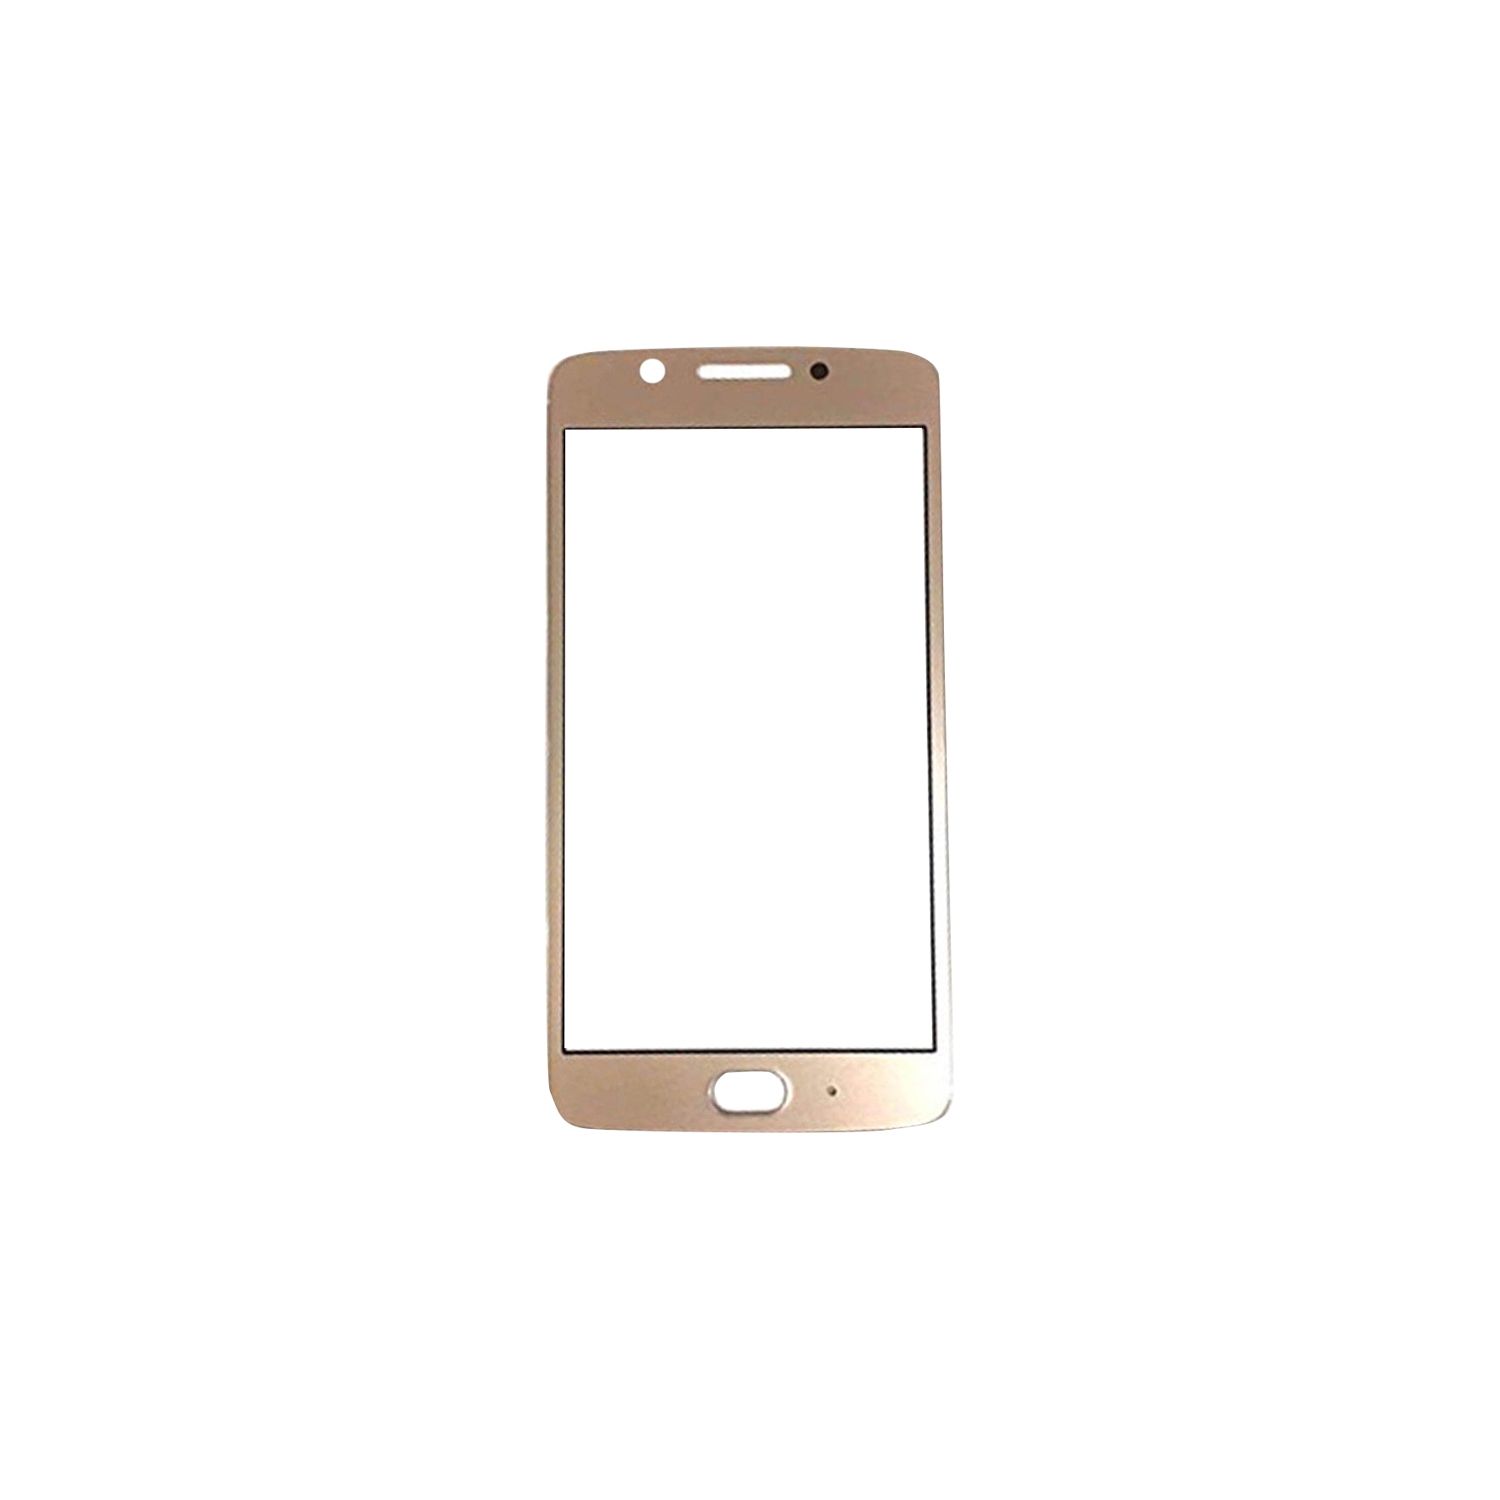 Replacement Front Top Glass Outer Screen Glass Lens Compatible With Motorola Moto G5 XT1670 - Gold